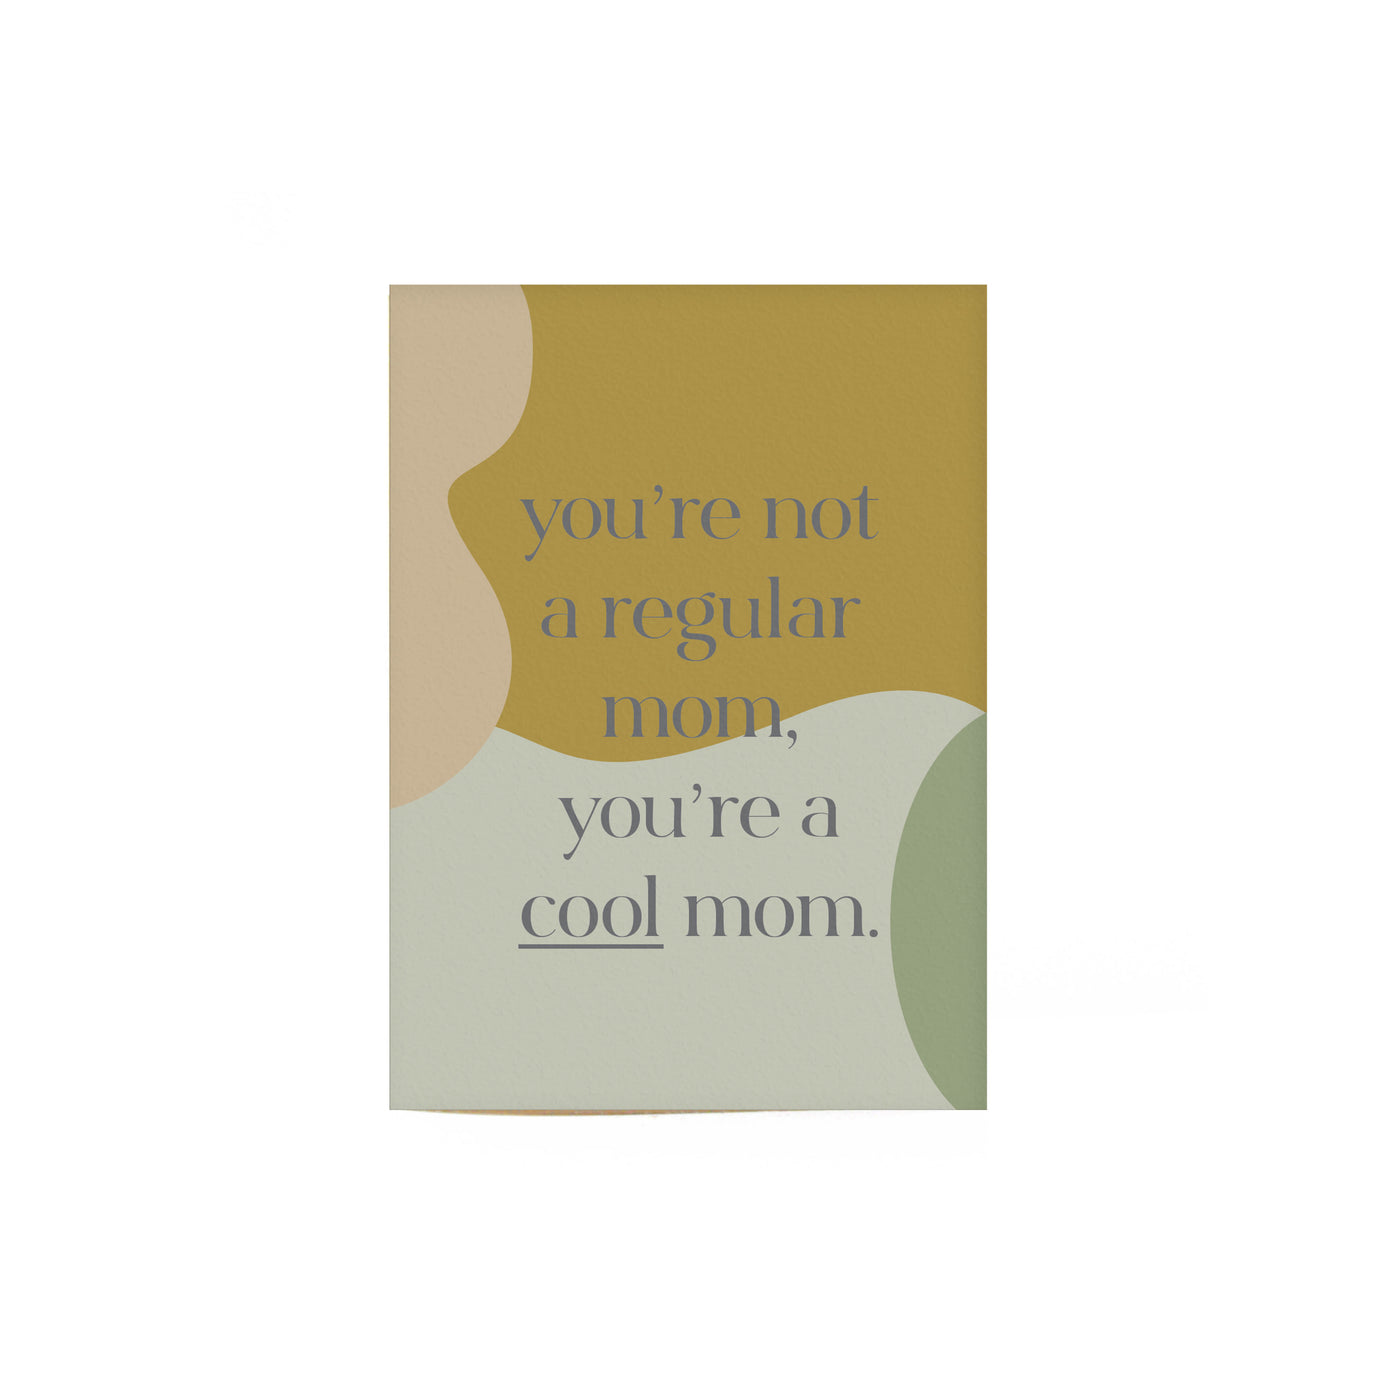 Cool mom card with neutral color tones that reads "you are not a regular mom, you're a cool mom"